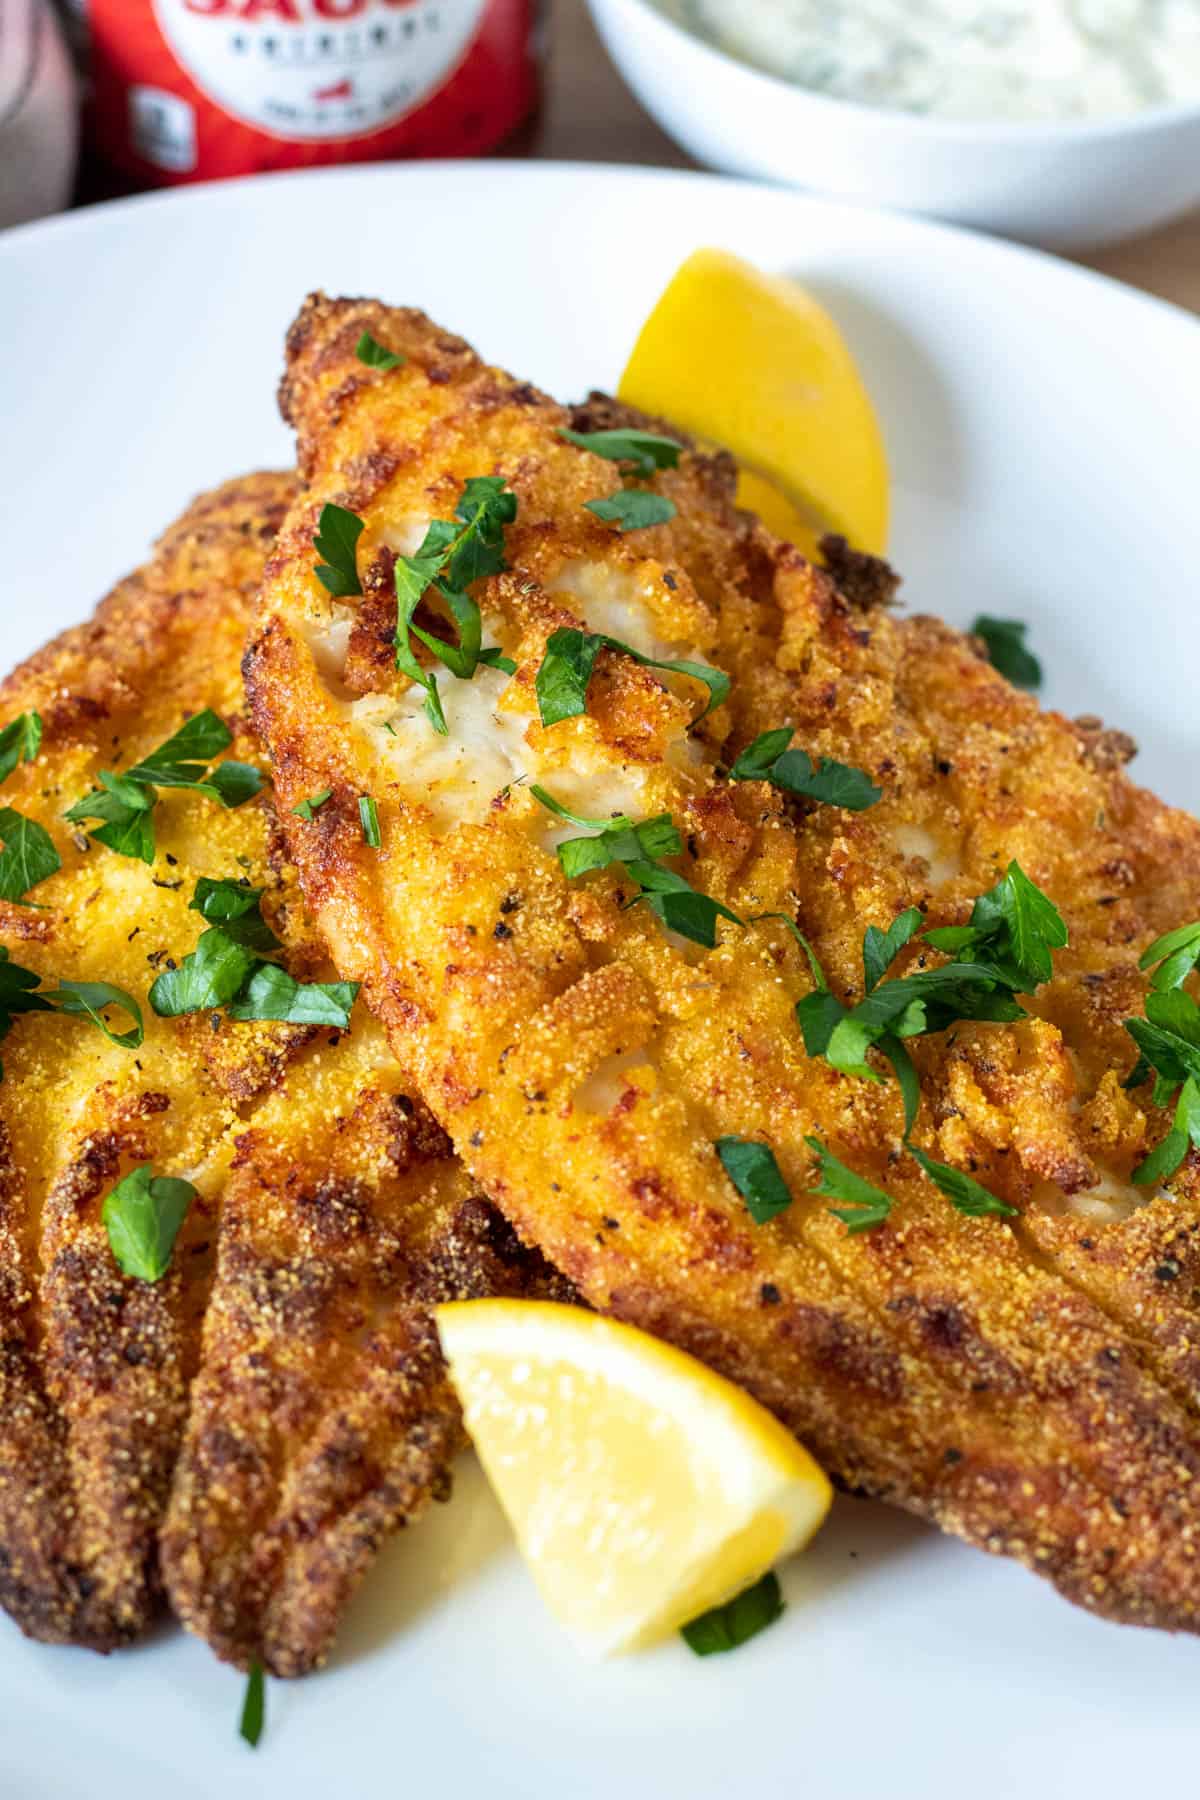 Two air crispy golden air fryer catfish fillets on plate with lemon wedges.